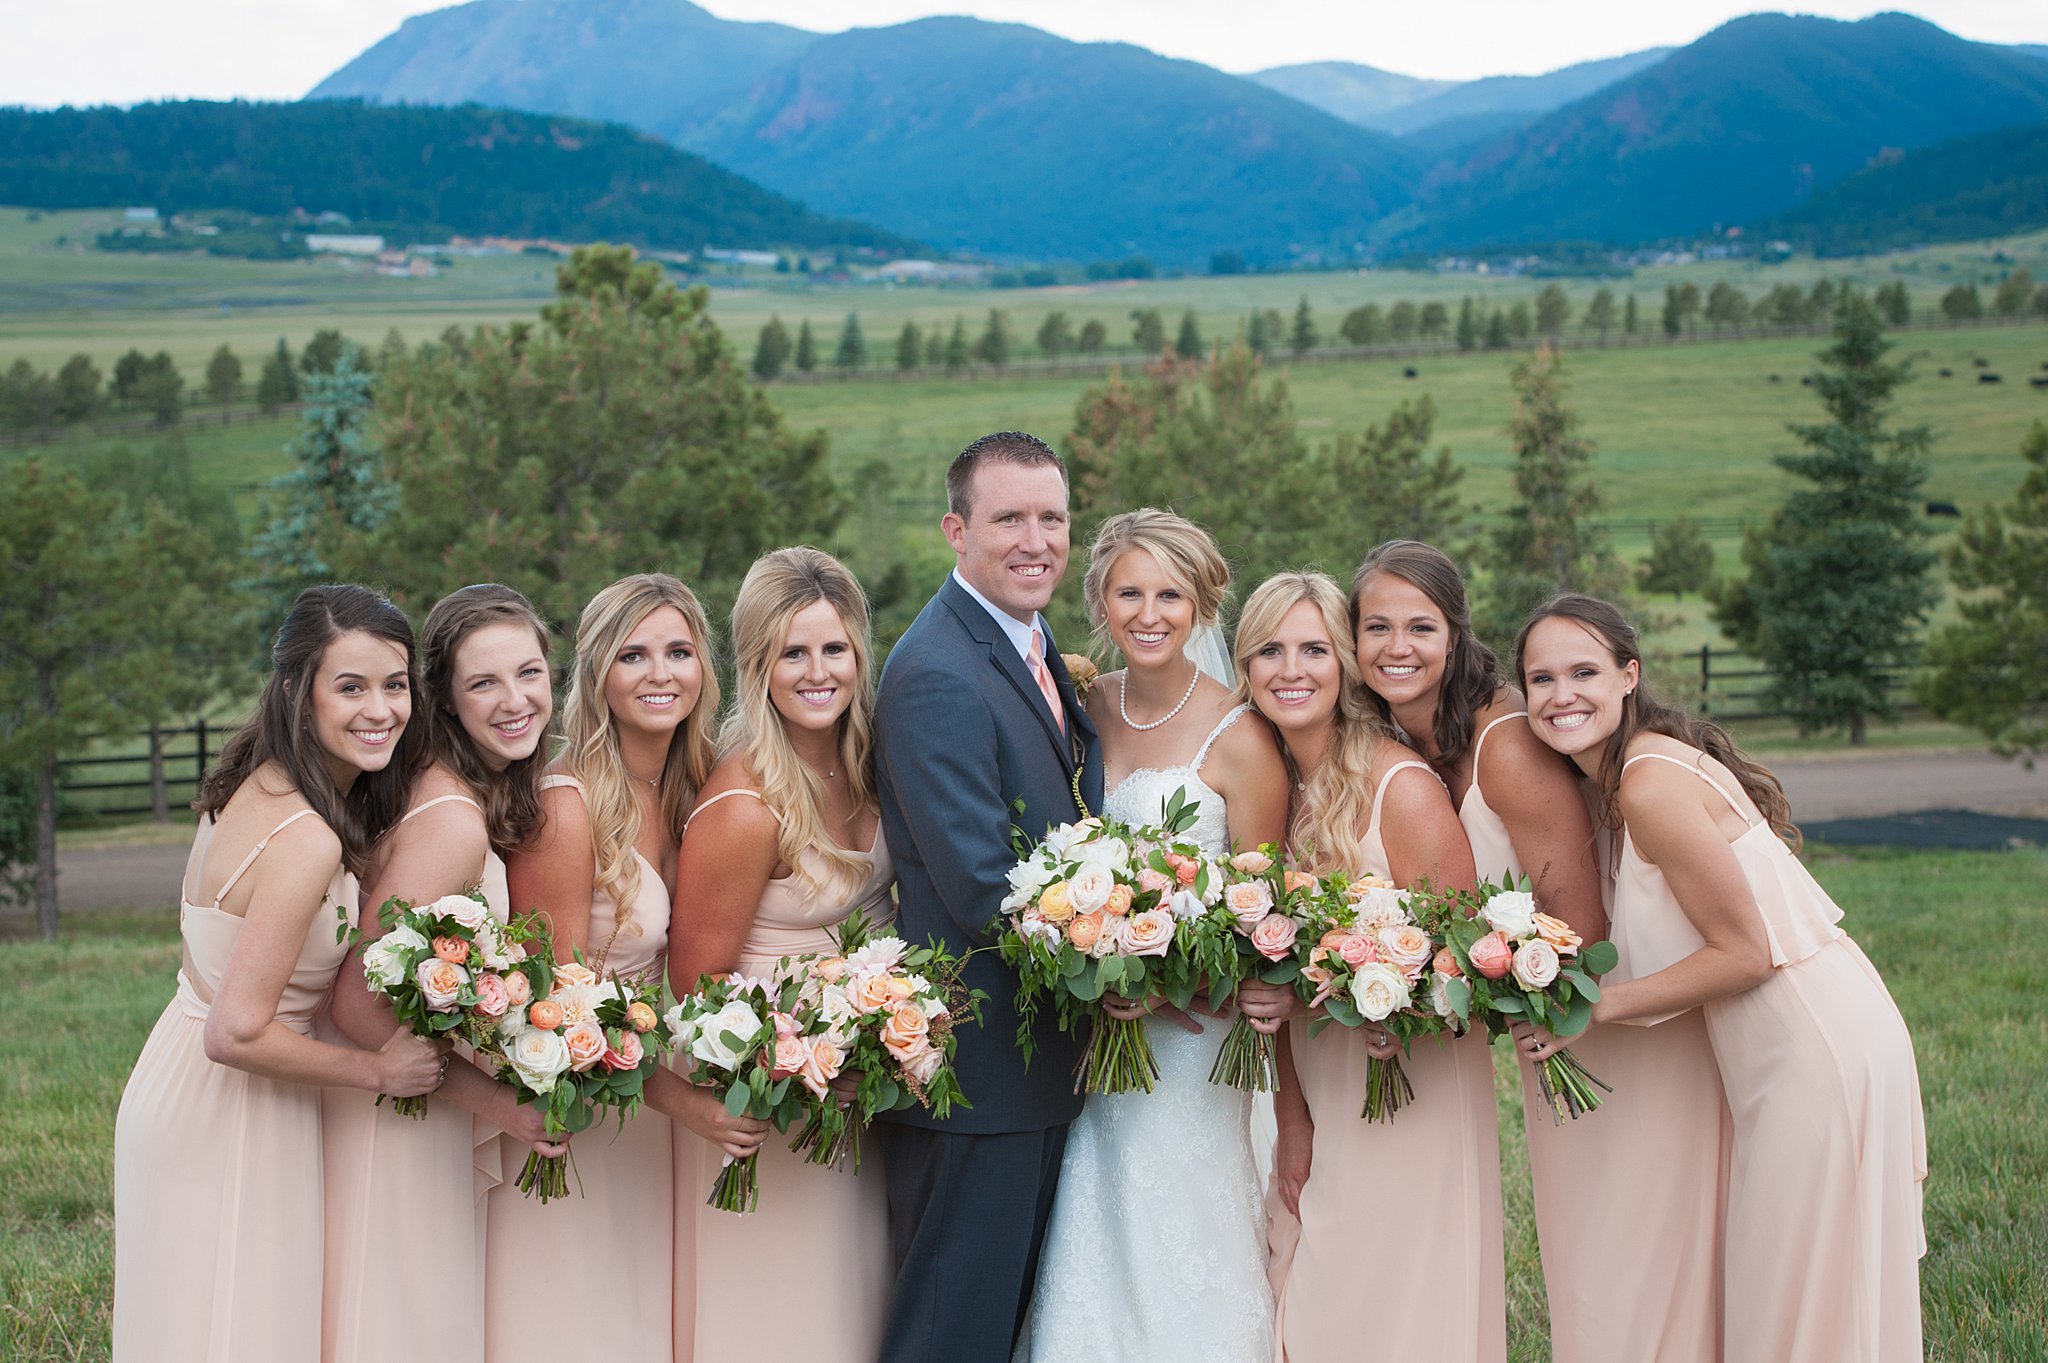 Newlyweds stand with their bridal party holding pink and white bouquets